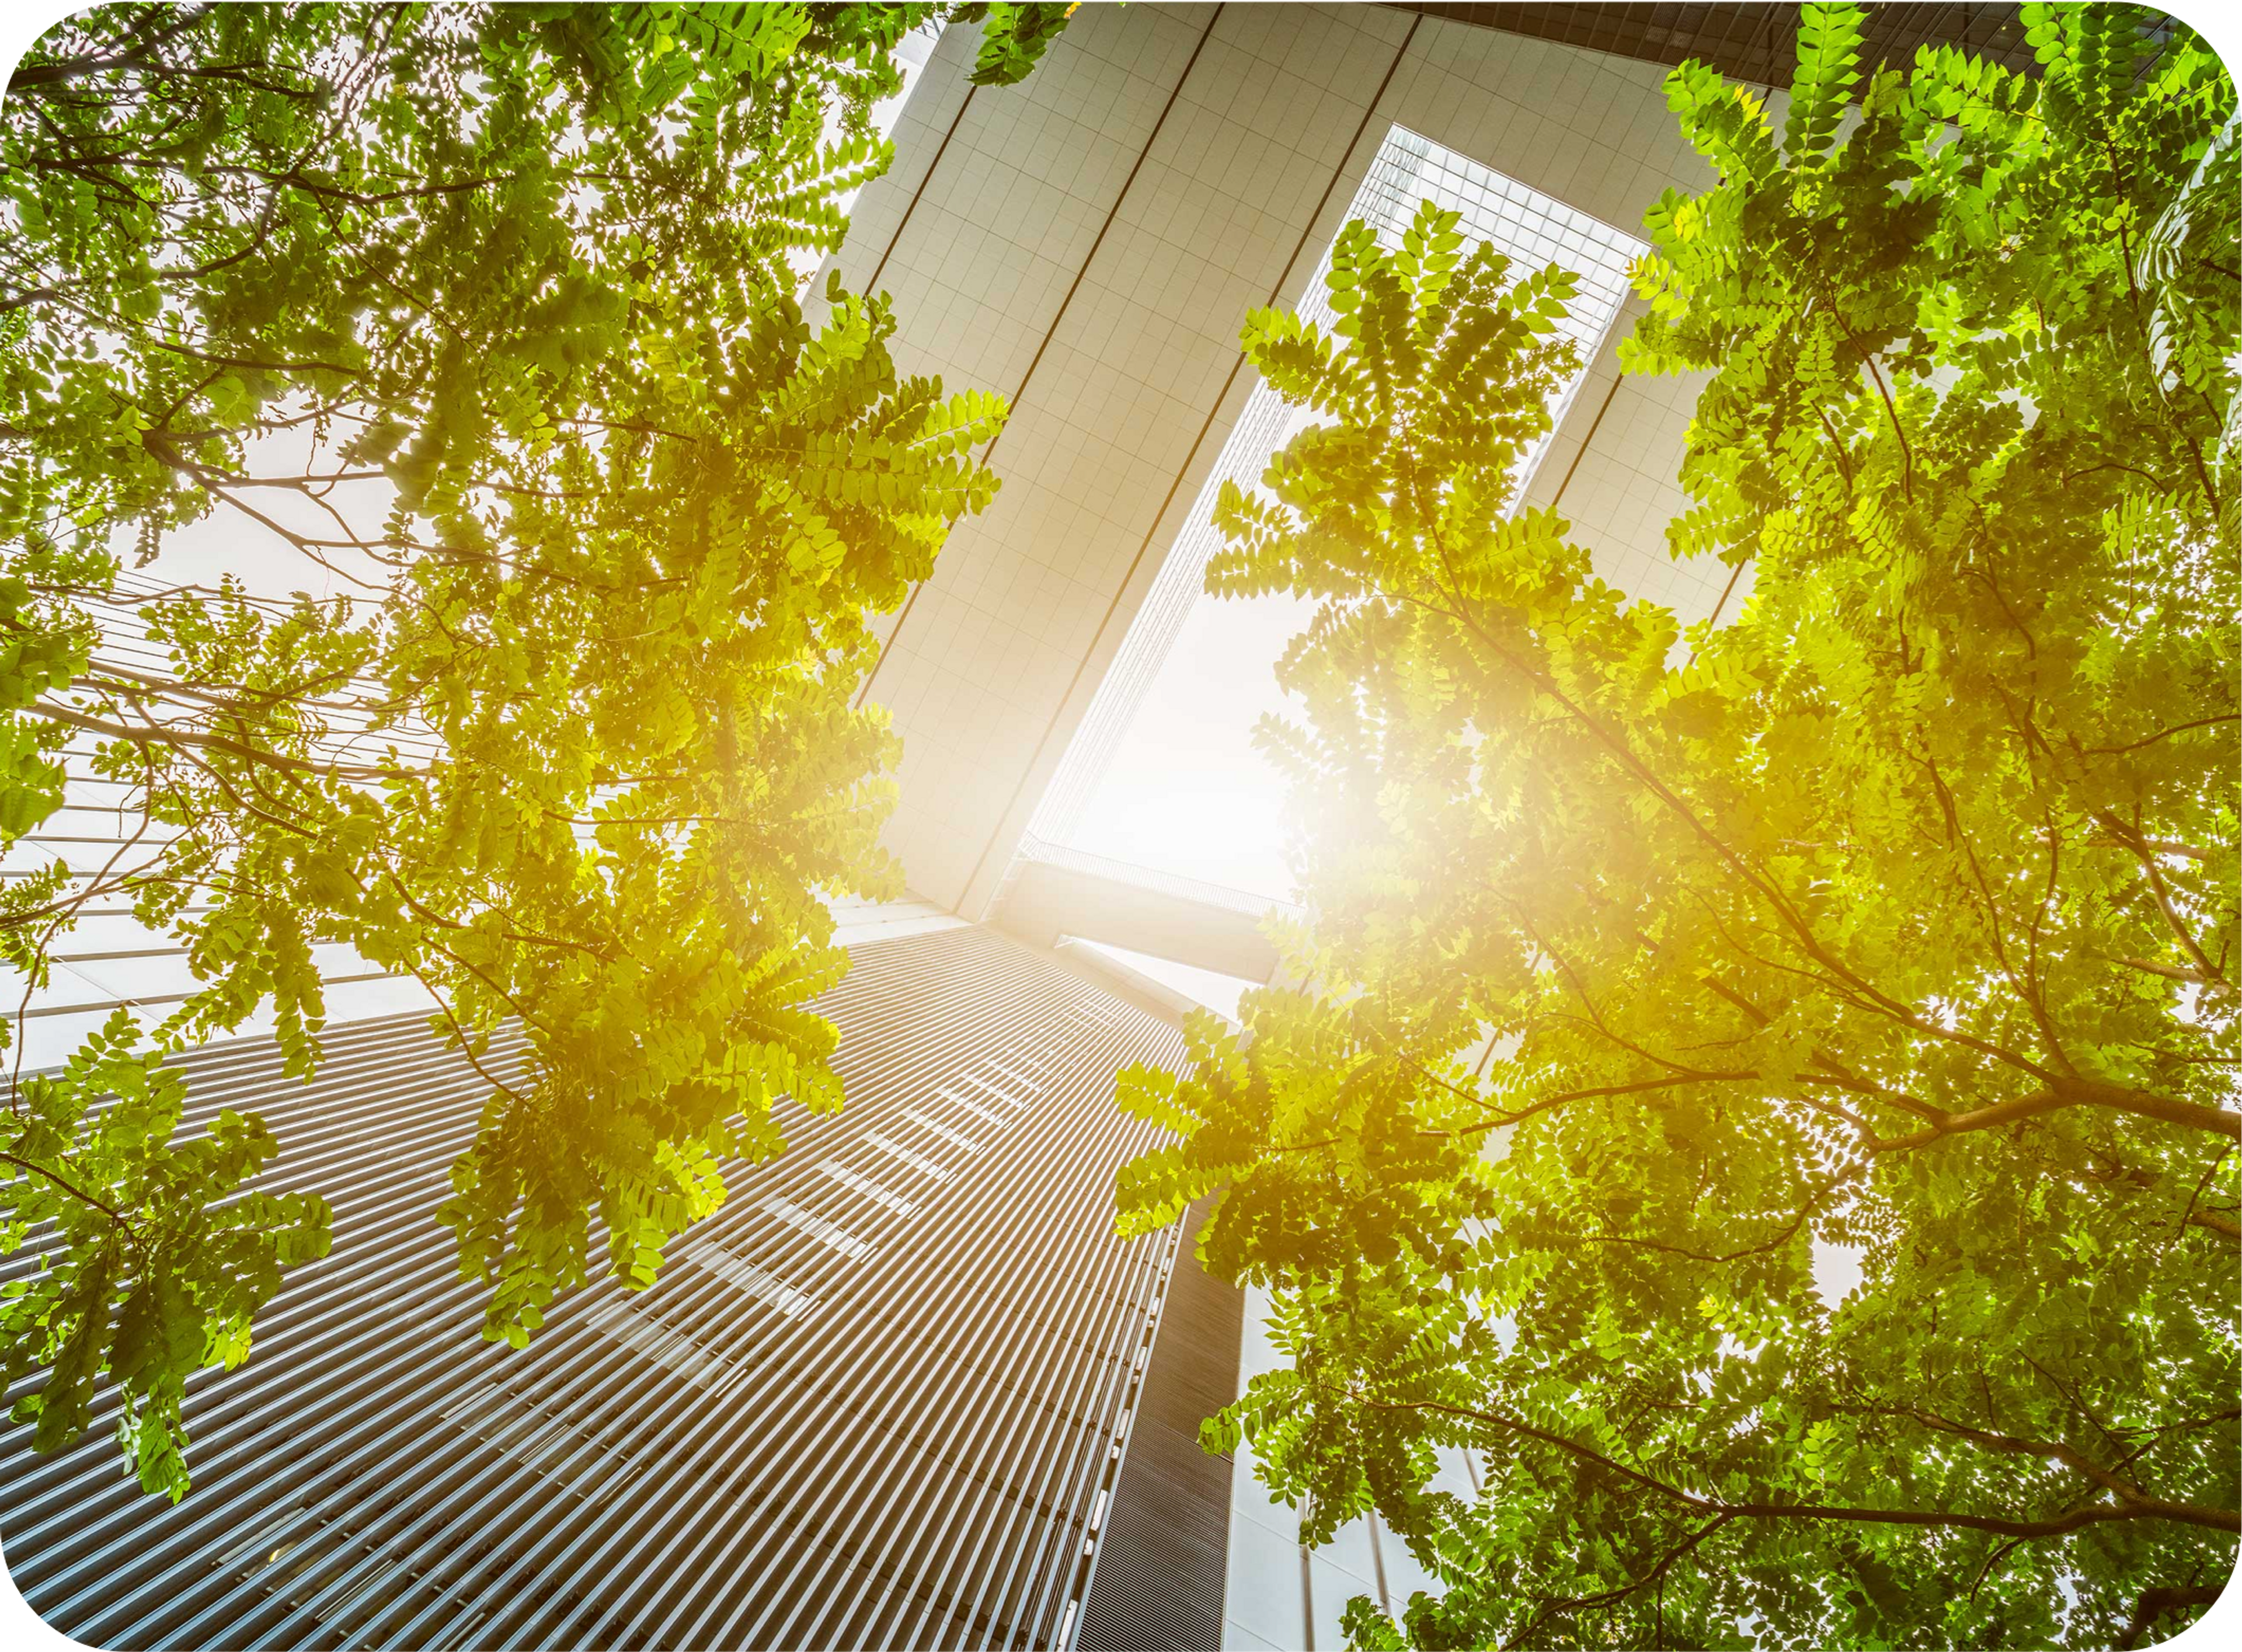 Picture of sunshine radiating through green treetops in a city with high-rise buildings